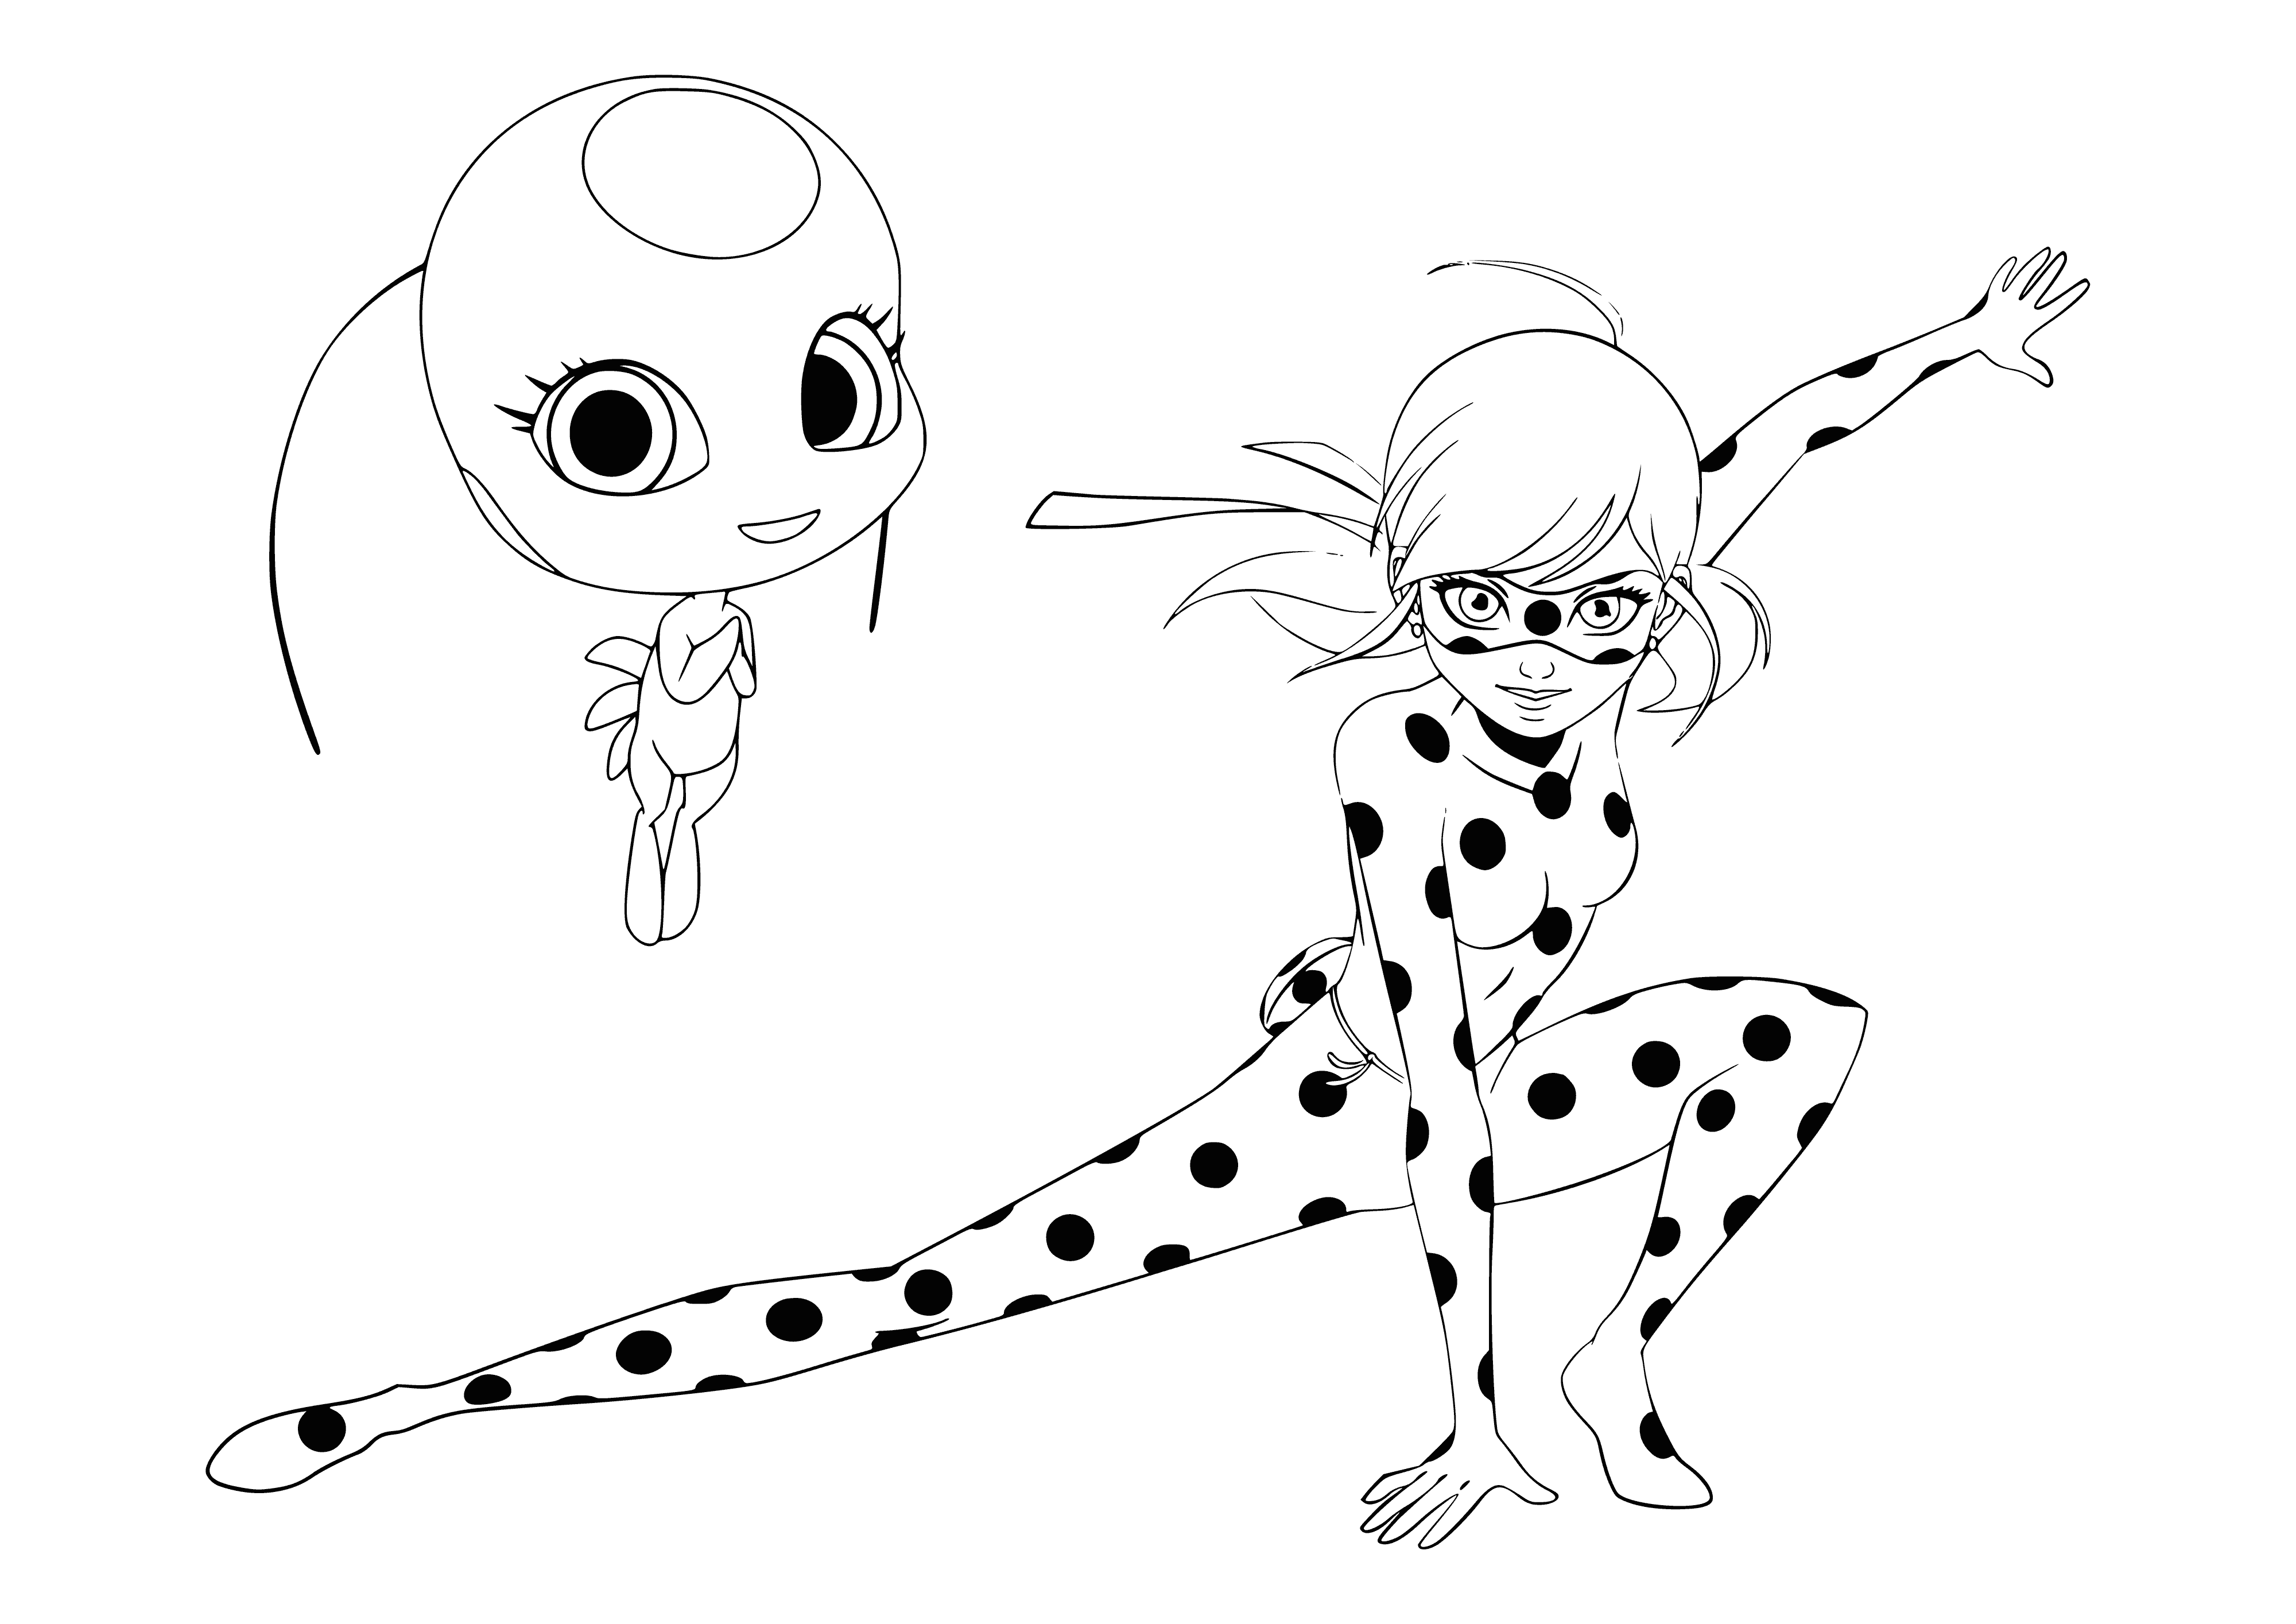 Lady Bug and Tikki coloring page